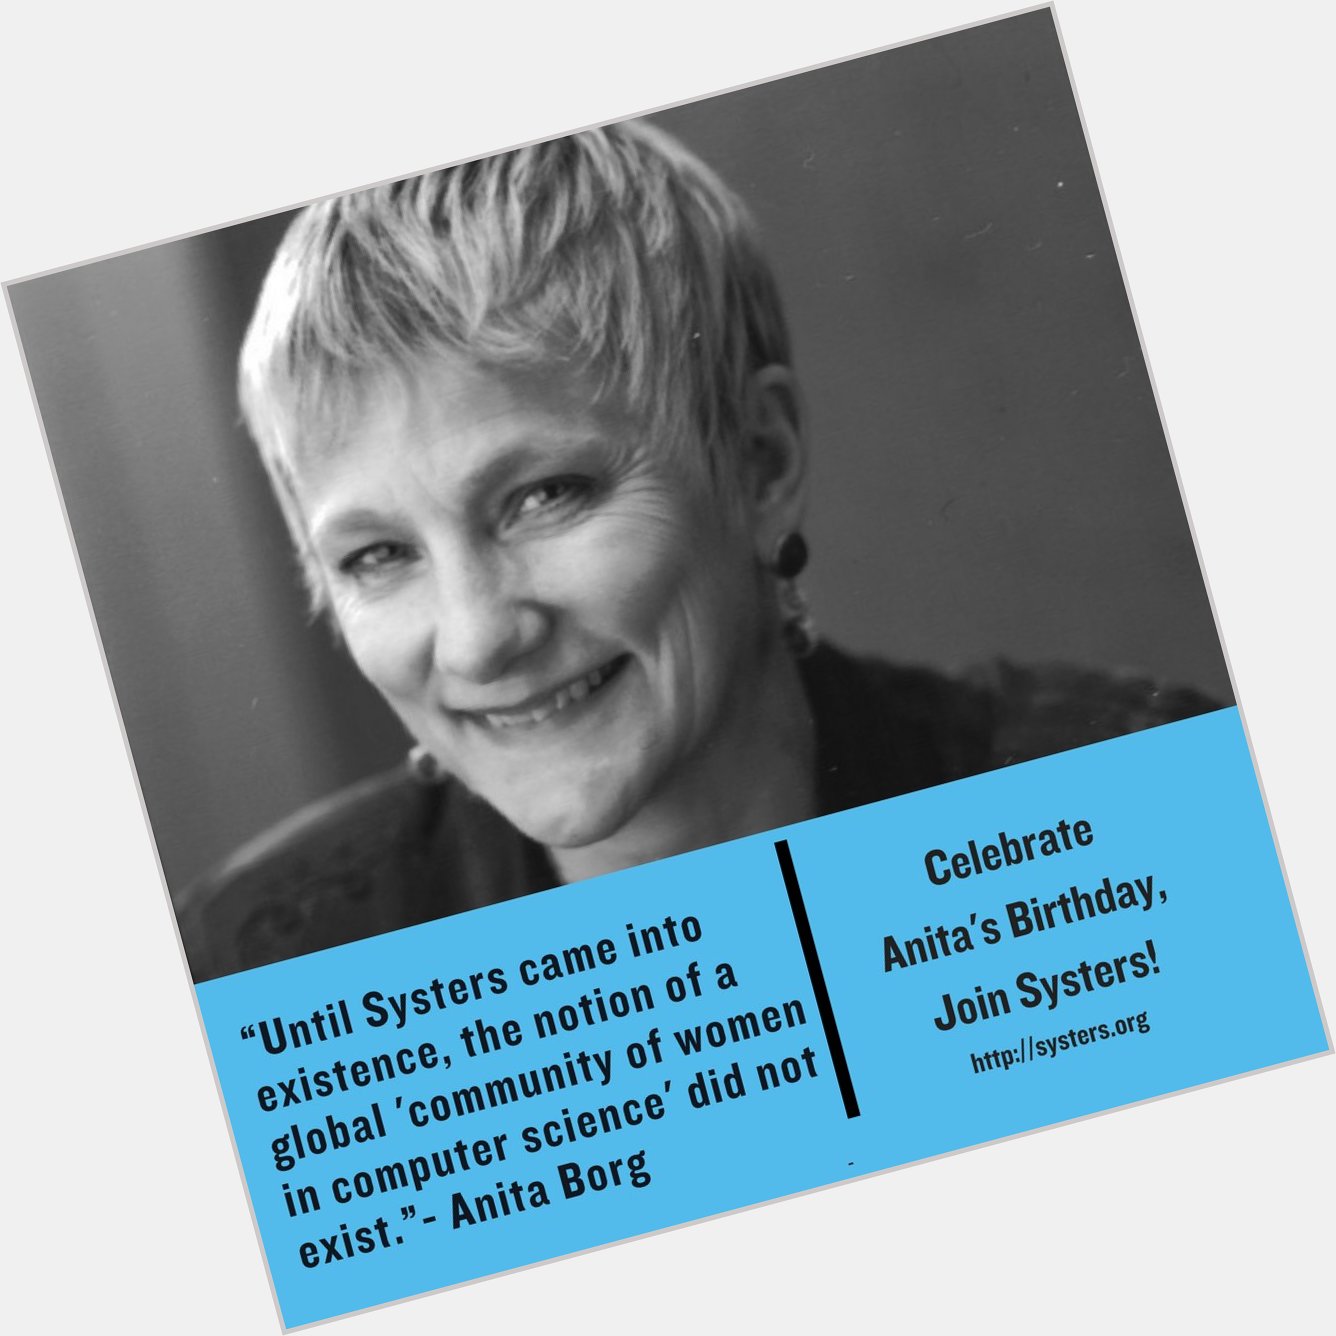 Happy Birthday, Anita Borg! Fun Fact She founded Systers in 1987 as a mailing list for women in computing. 